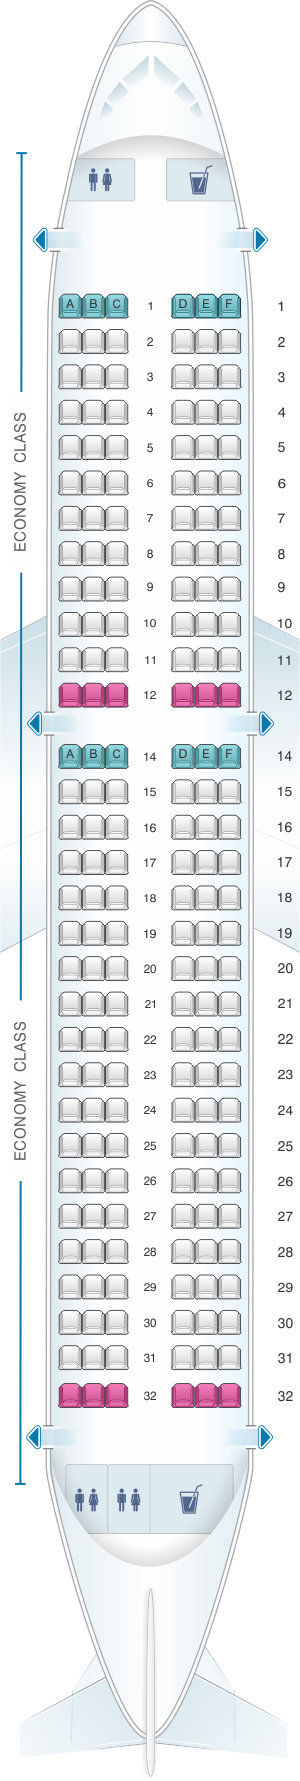 Seat map for Iberia Airbus A320 Neo